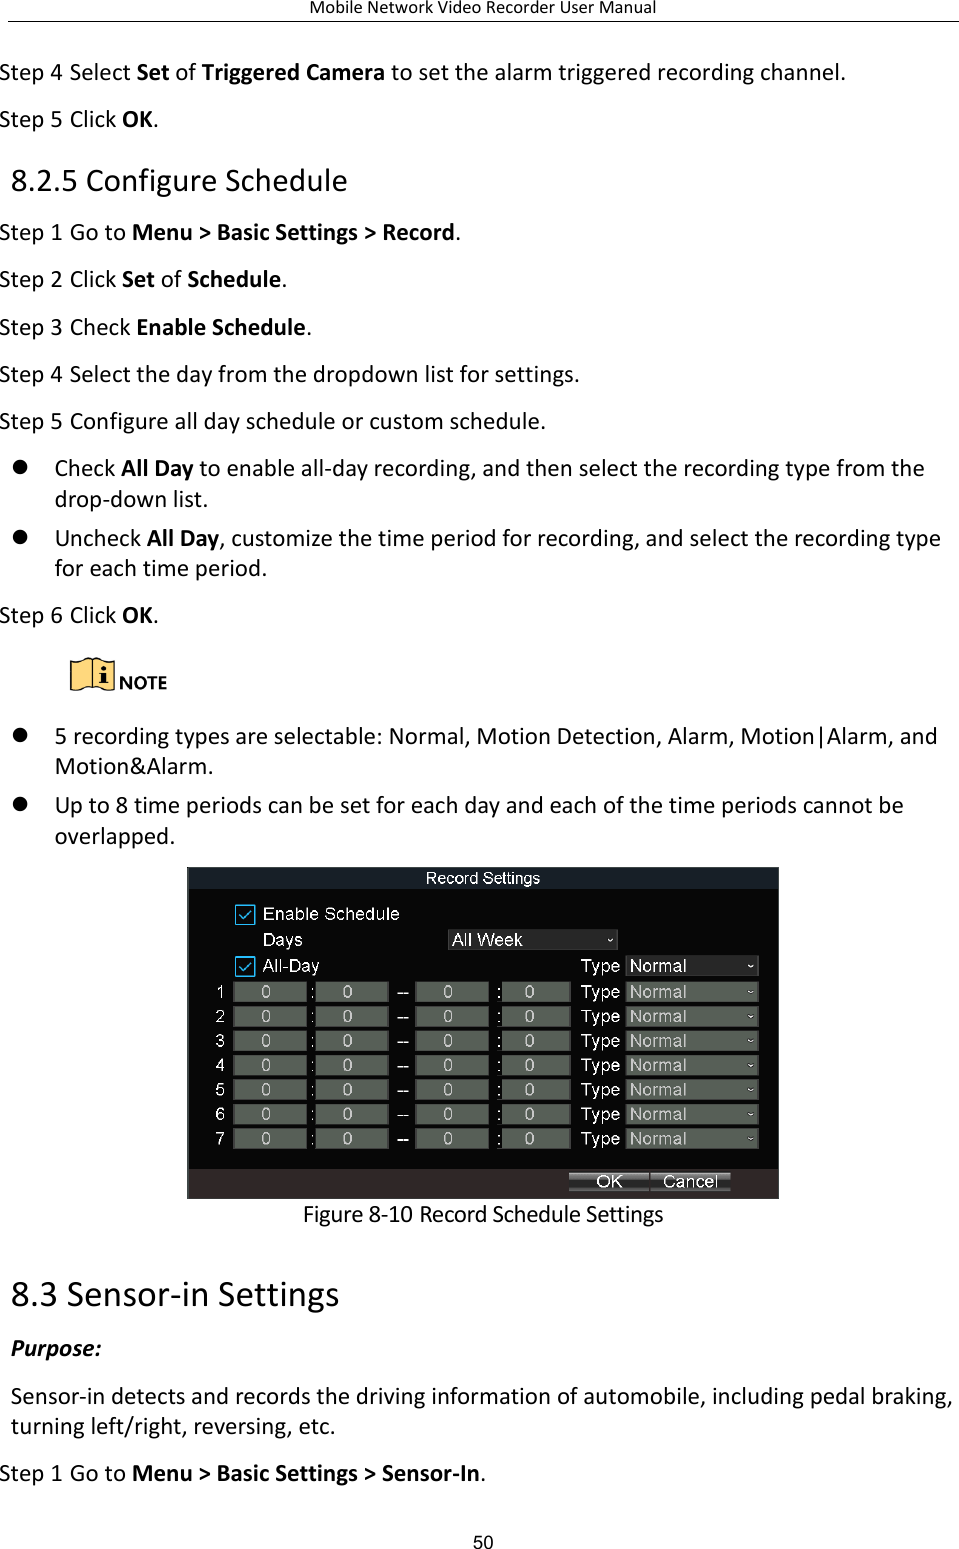 Mobile Network Video Recorder User Manual 50 Step 4 Select Set of Triggered Camera to set the alarm triggered recording channel. Step 5 Click OK. 8.2.5 Configure Schedule Step 1 Go to Menu &gt; Basic Settings &gt; Record. Step 2 Click Set of Schedule. Step 3 Check Enable Schedule. Step 4 Select the day from the dropdown list for settings. Step 5 Configure all day schedule or custom schedule.  Check All Day to enable all-day recording, and then select the recording type from the drop-down list.  Uncheck All Day, customize the time period for recording, and select the recording type for each time period. Step 6 Click OK.    5 recording types are selectable: Normal, Motion Detection, Alarm, Motion|Alarm, and Motion&amp;Alarm.  Up to 8 time periods can be set for each day and each of the time periods cannot be overlapped.  Figure 8-10 Record Schedule Settings 8.3 Sensor-in Settings Purpose: Sensor-in detects and records the driving information of automobile, including pedal braking, turning left/right, reversing, etc. Step 1 Go to Menu &gt; Basic Settings &gt; Sensor-In. 